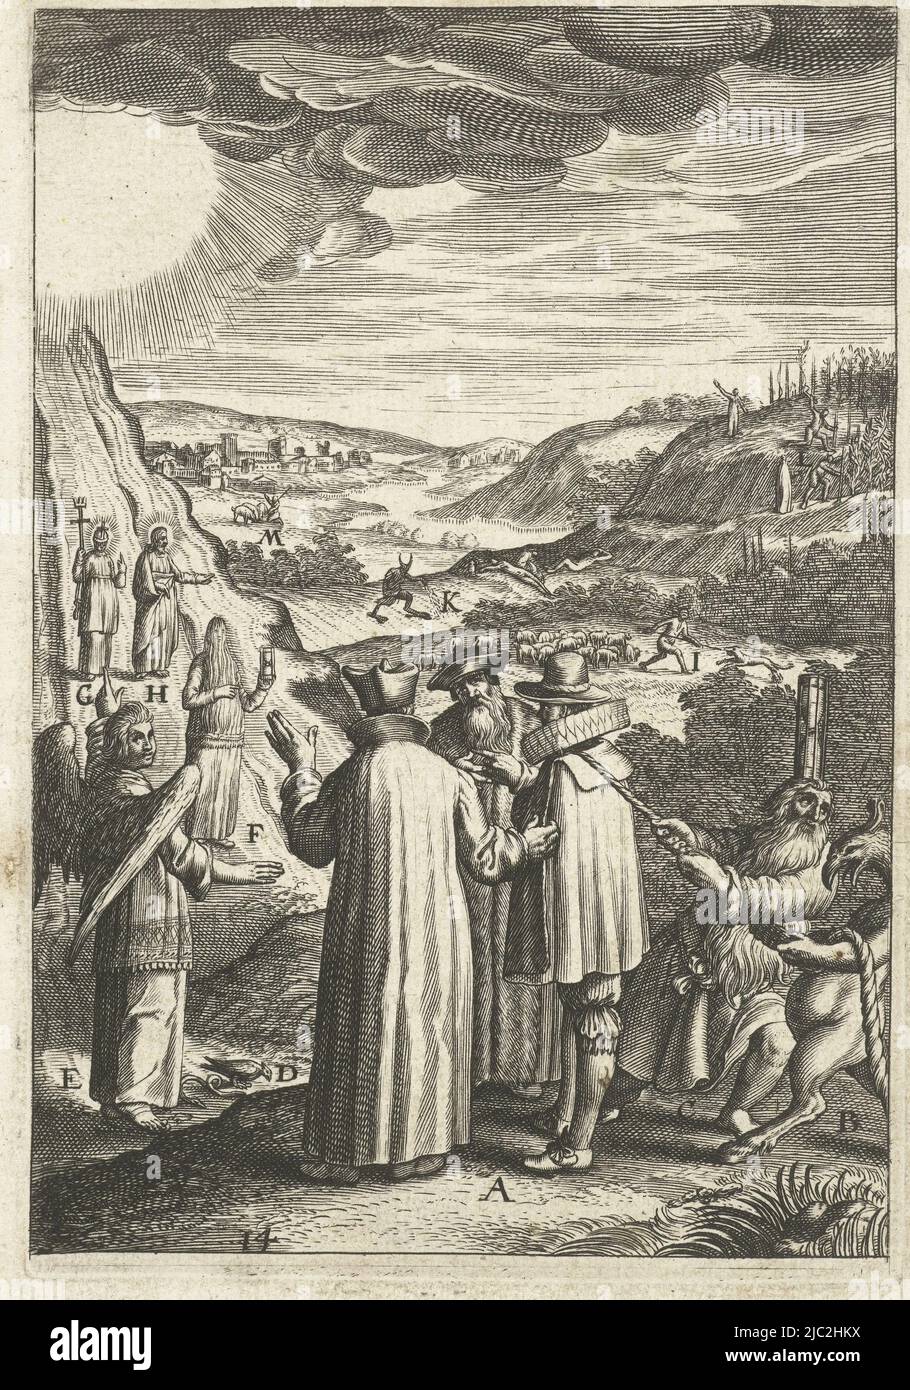 A man advises his friends to live in virtue. The devil and a wicked man are pulling an ever-thicker rope that represents the temptation of a life of sin that the man must break. An angel points the right way to eternal life. The landscape includes the parables of the shepherd and the sower, Emblem with man who advises his friends to live virtuously Den wech des eeuwich levens (series title), Boëtius Adamsz. Bolswert, print maker: anonymous, publisher: Hendrik Aertssens (II), Antwerp, 1620 - 1623 and/or 1623, paper, engraving, h 137 mm × w 93 mm Stock Photo